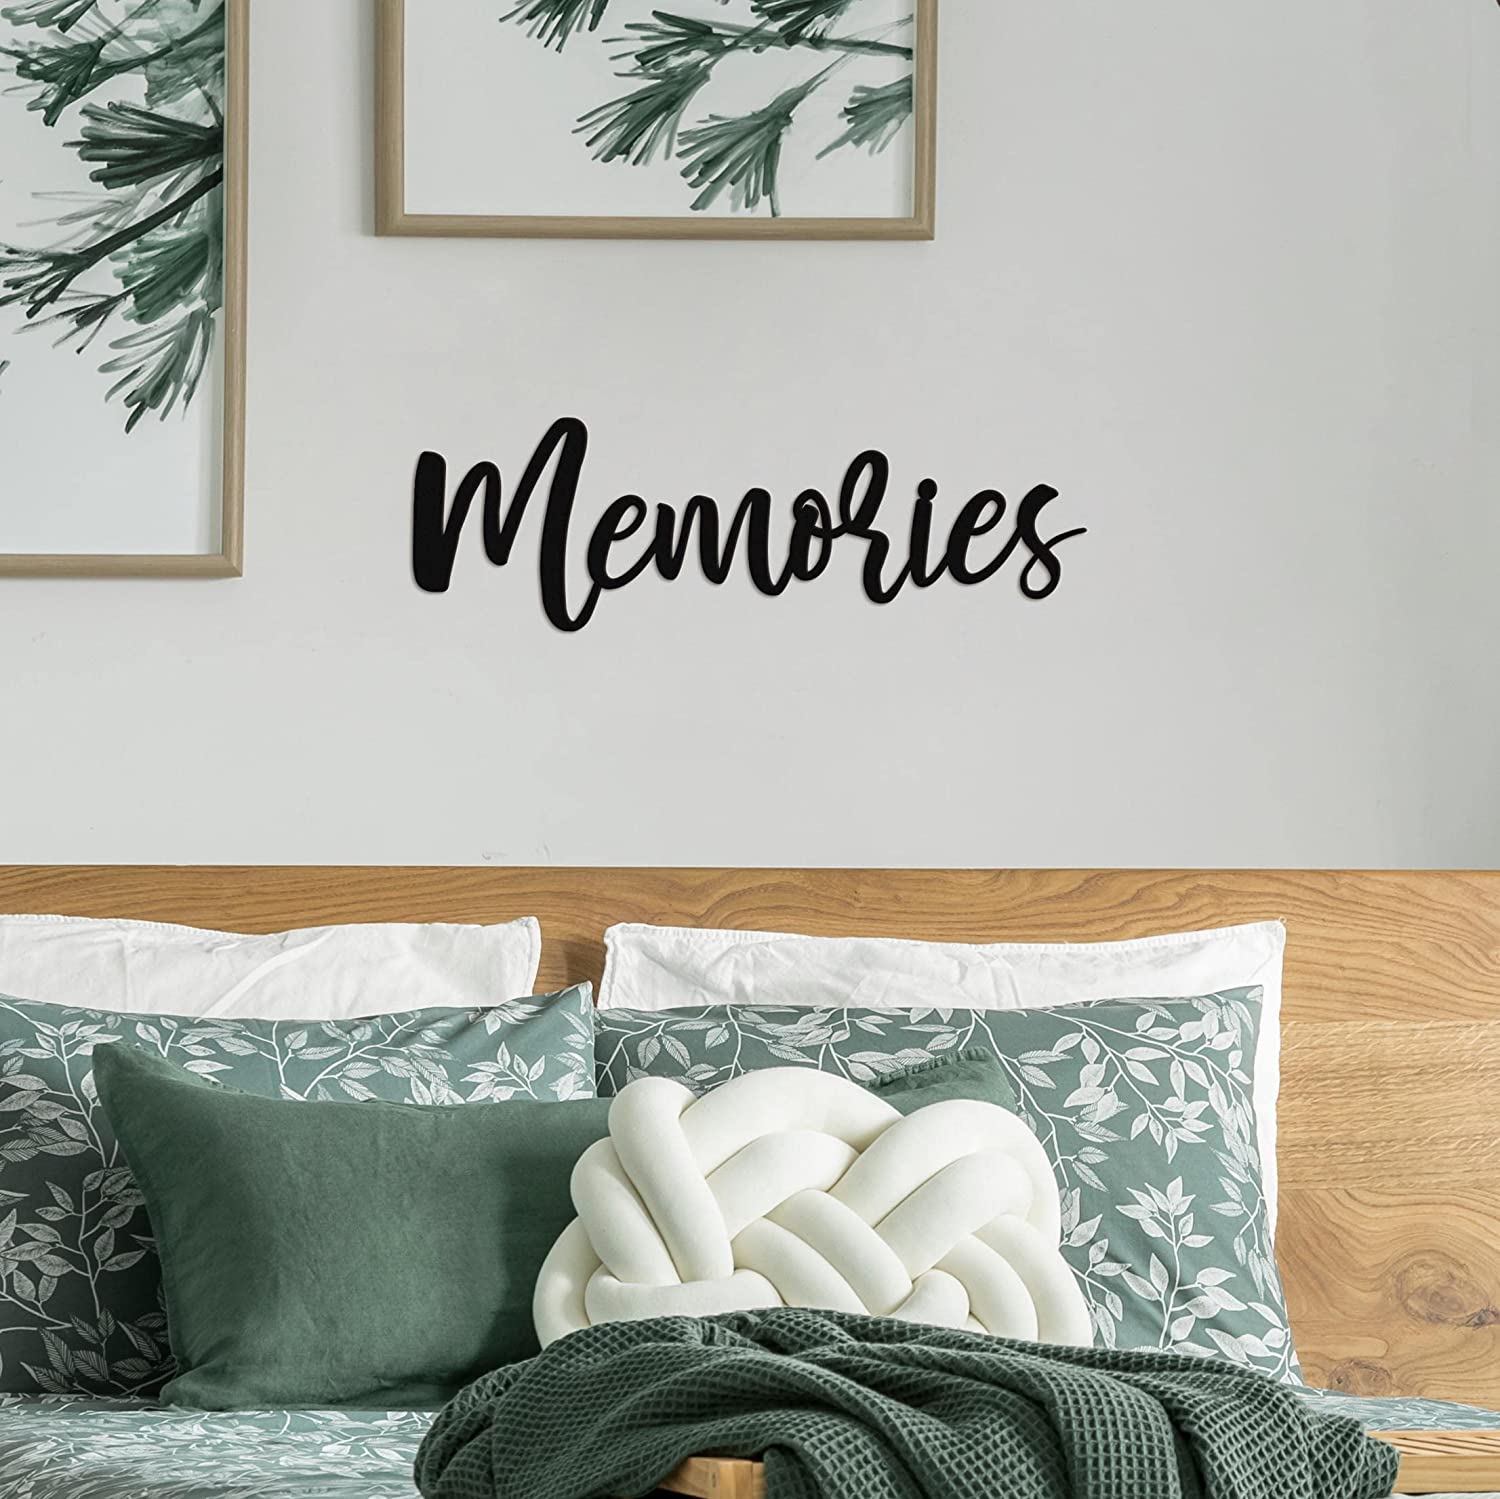 Memories Wall Decor Metal Art Piece - 17"X5" Memories Sign Metal Cut Out Signs From Durable Powder-Coated Metal